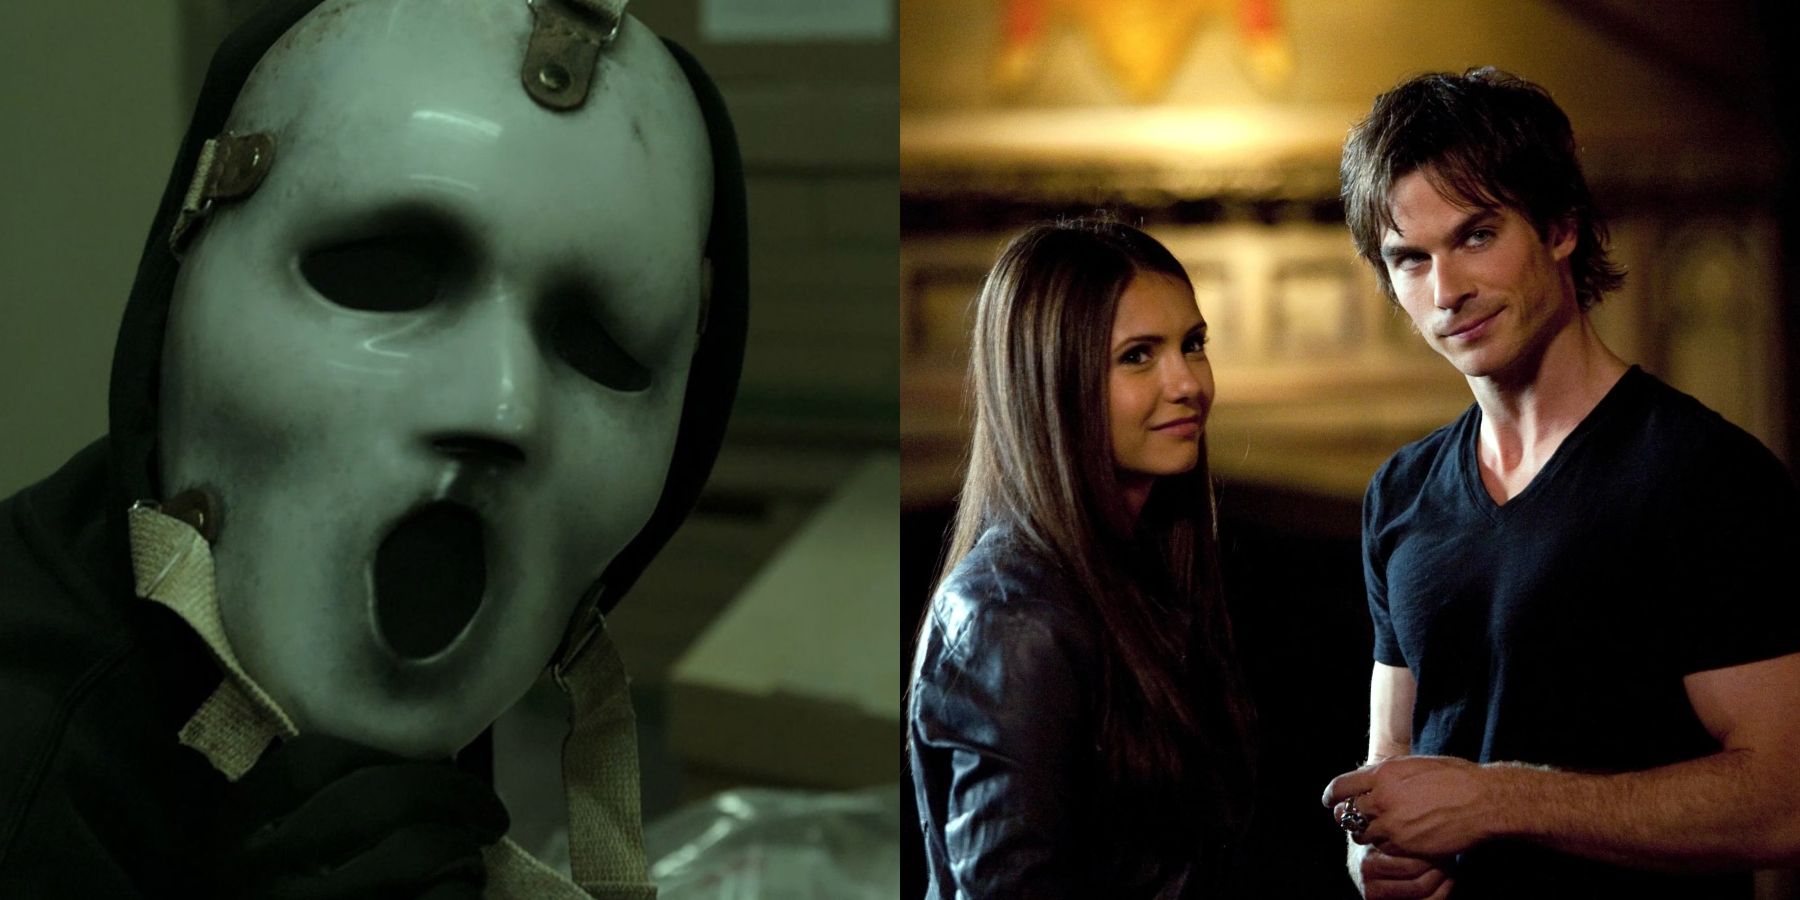 Split image of Ghostface in MTV Scream show and Elena and Damon in The Vampire Diaries